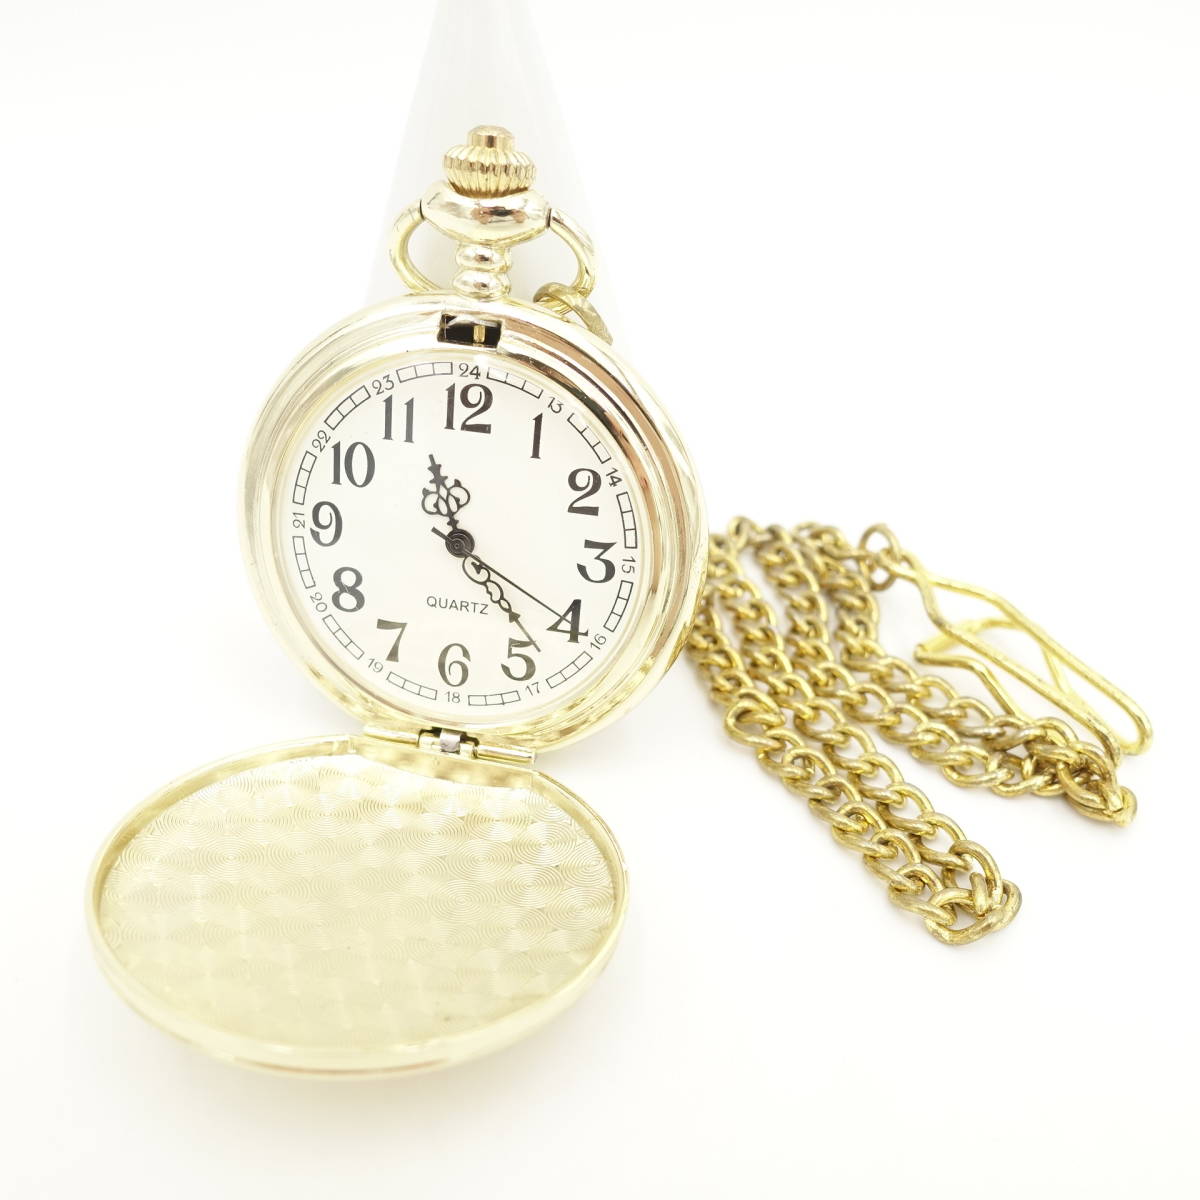  pocket watch / Gold color / used / chain attaching / operation not yet verification / antique / retro /12051